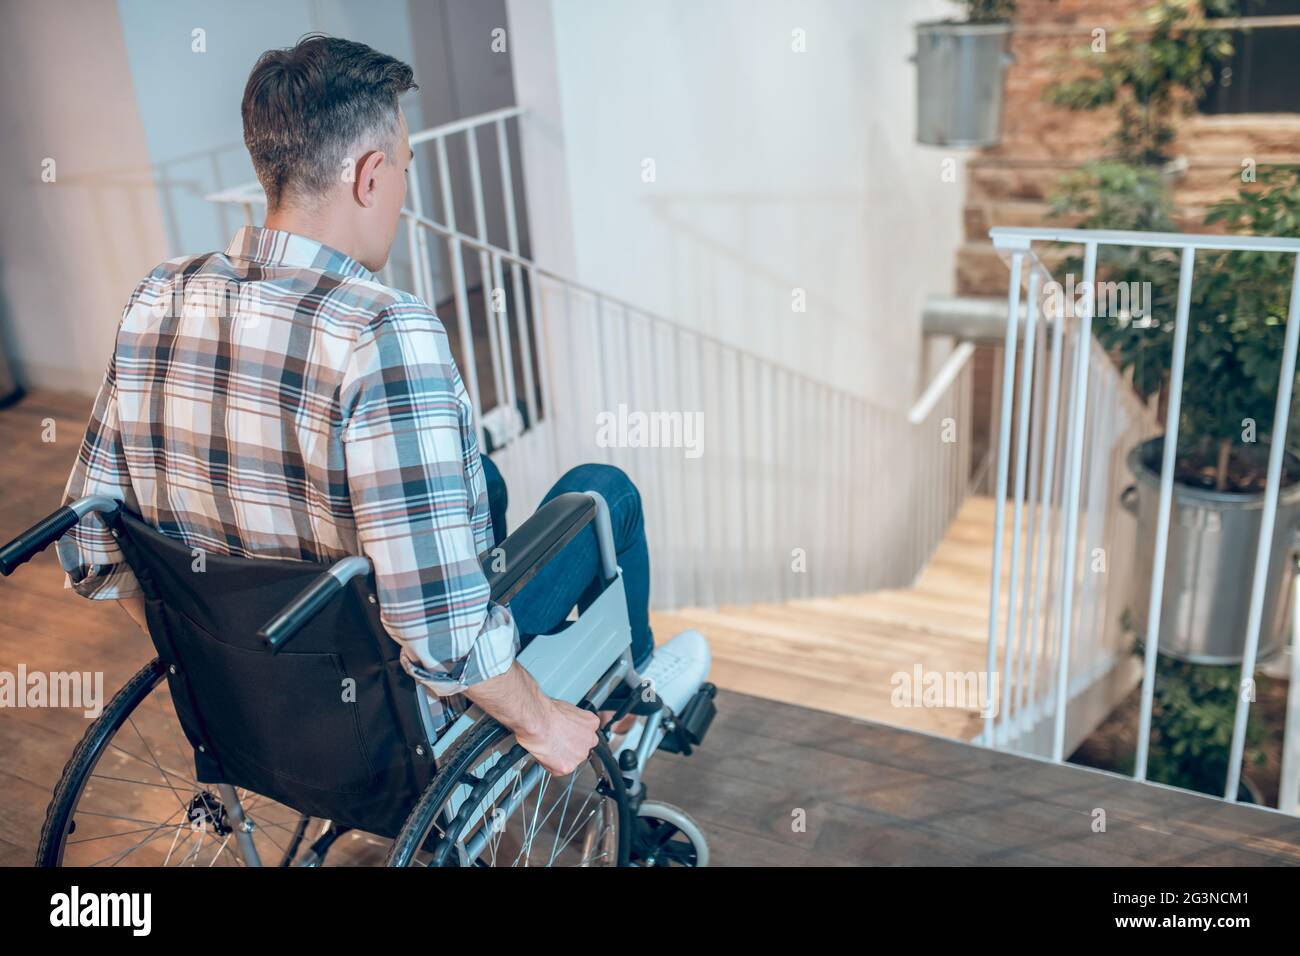 View back of a man in wheelchair near stairs Stock Photo